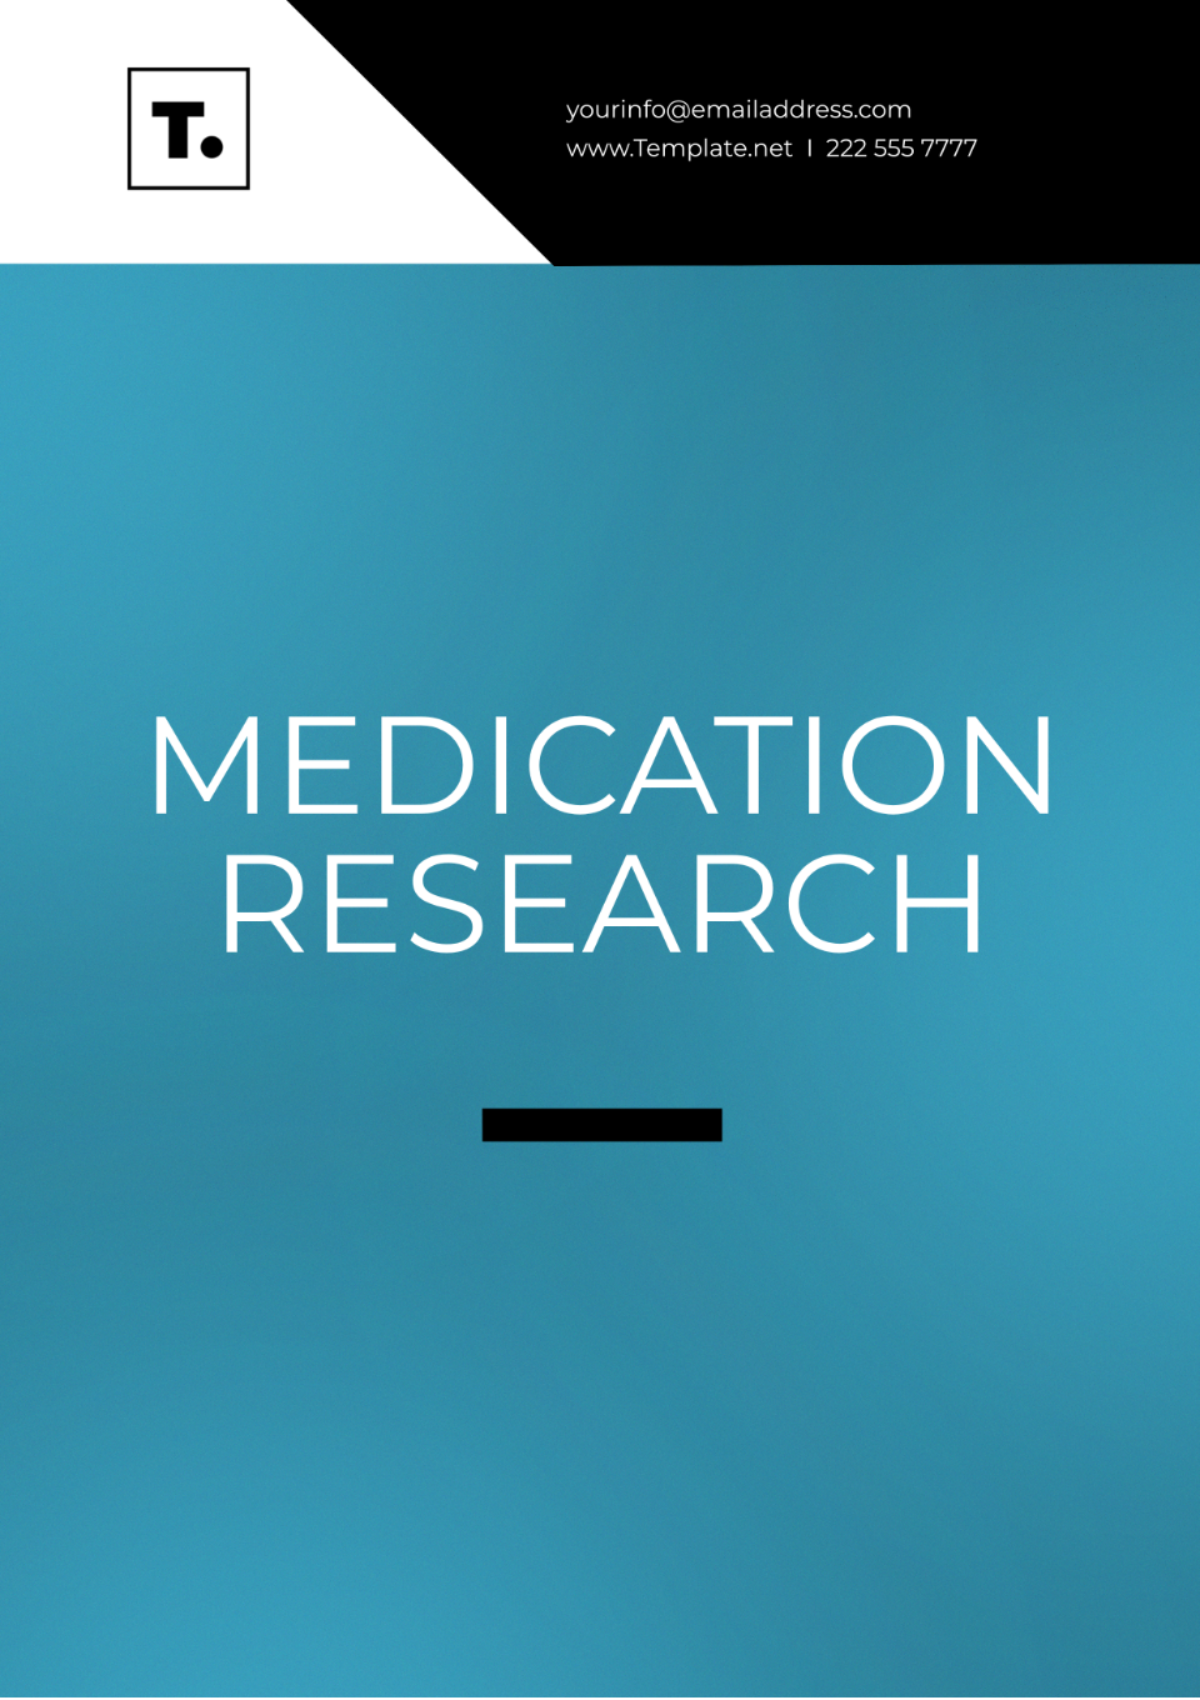 Free Medication Research Template